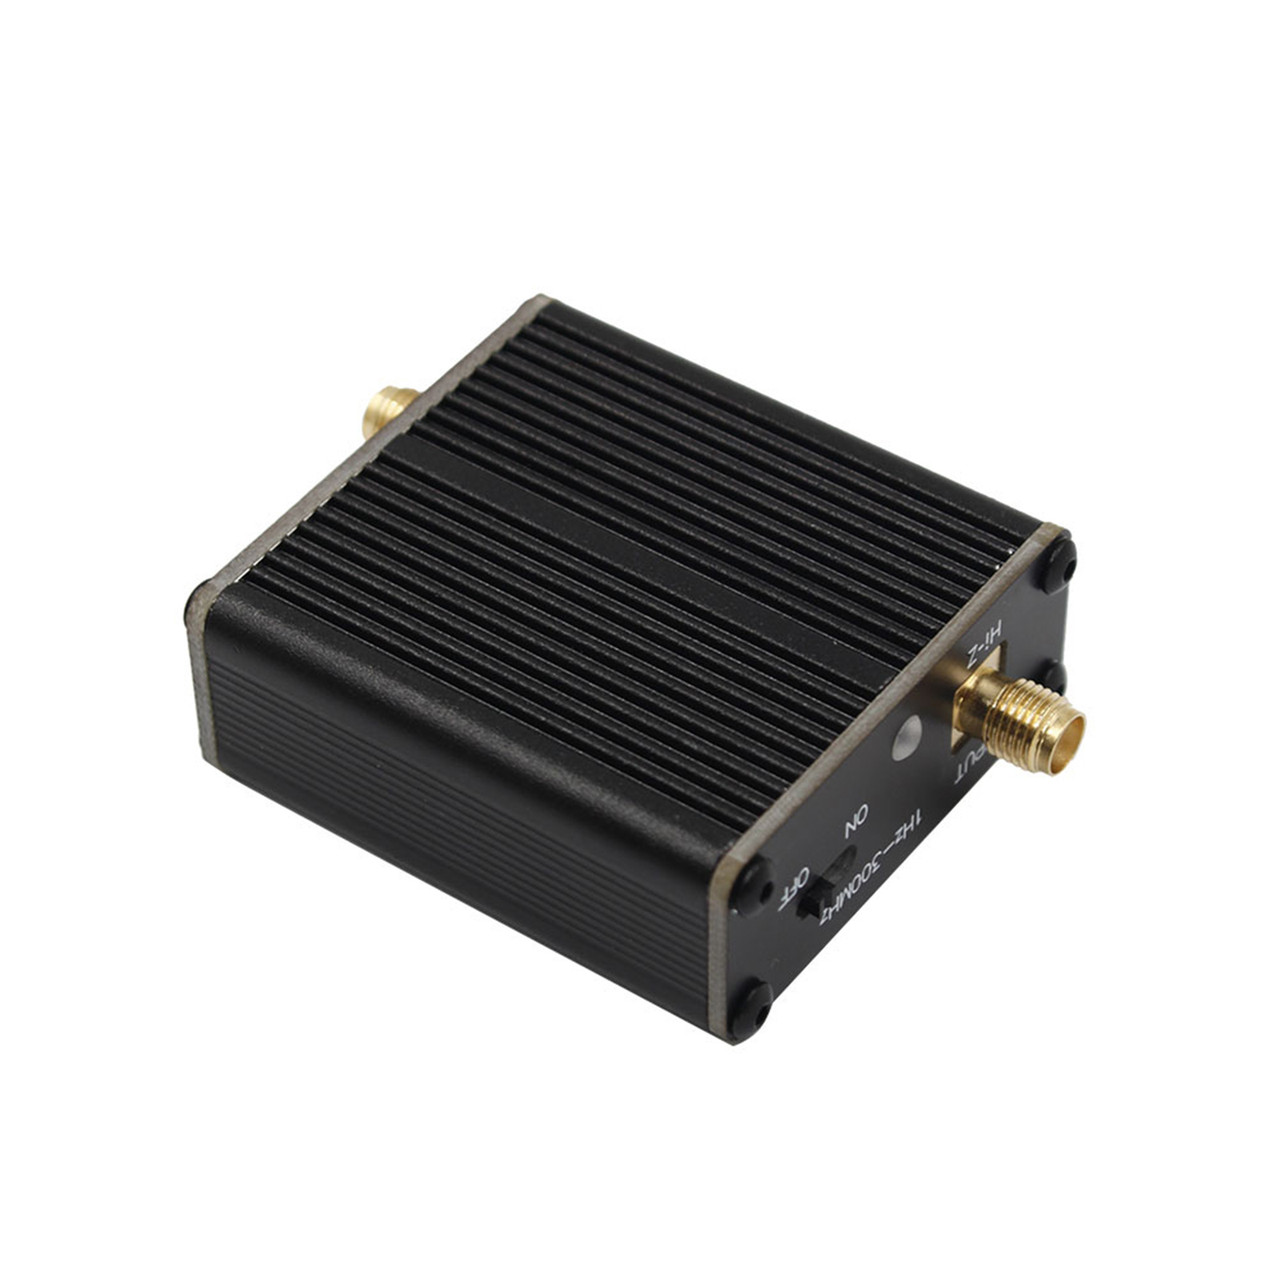 High Impedance Amplifier for SDR Walkie Talkie Small Loop Antenna Donut Antenna